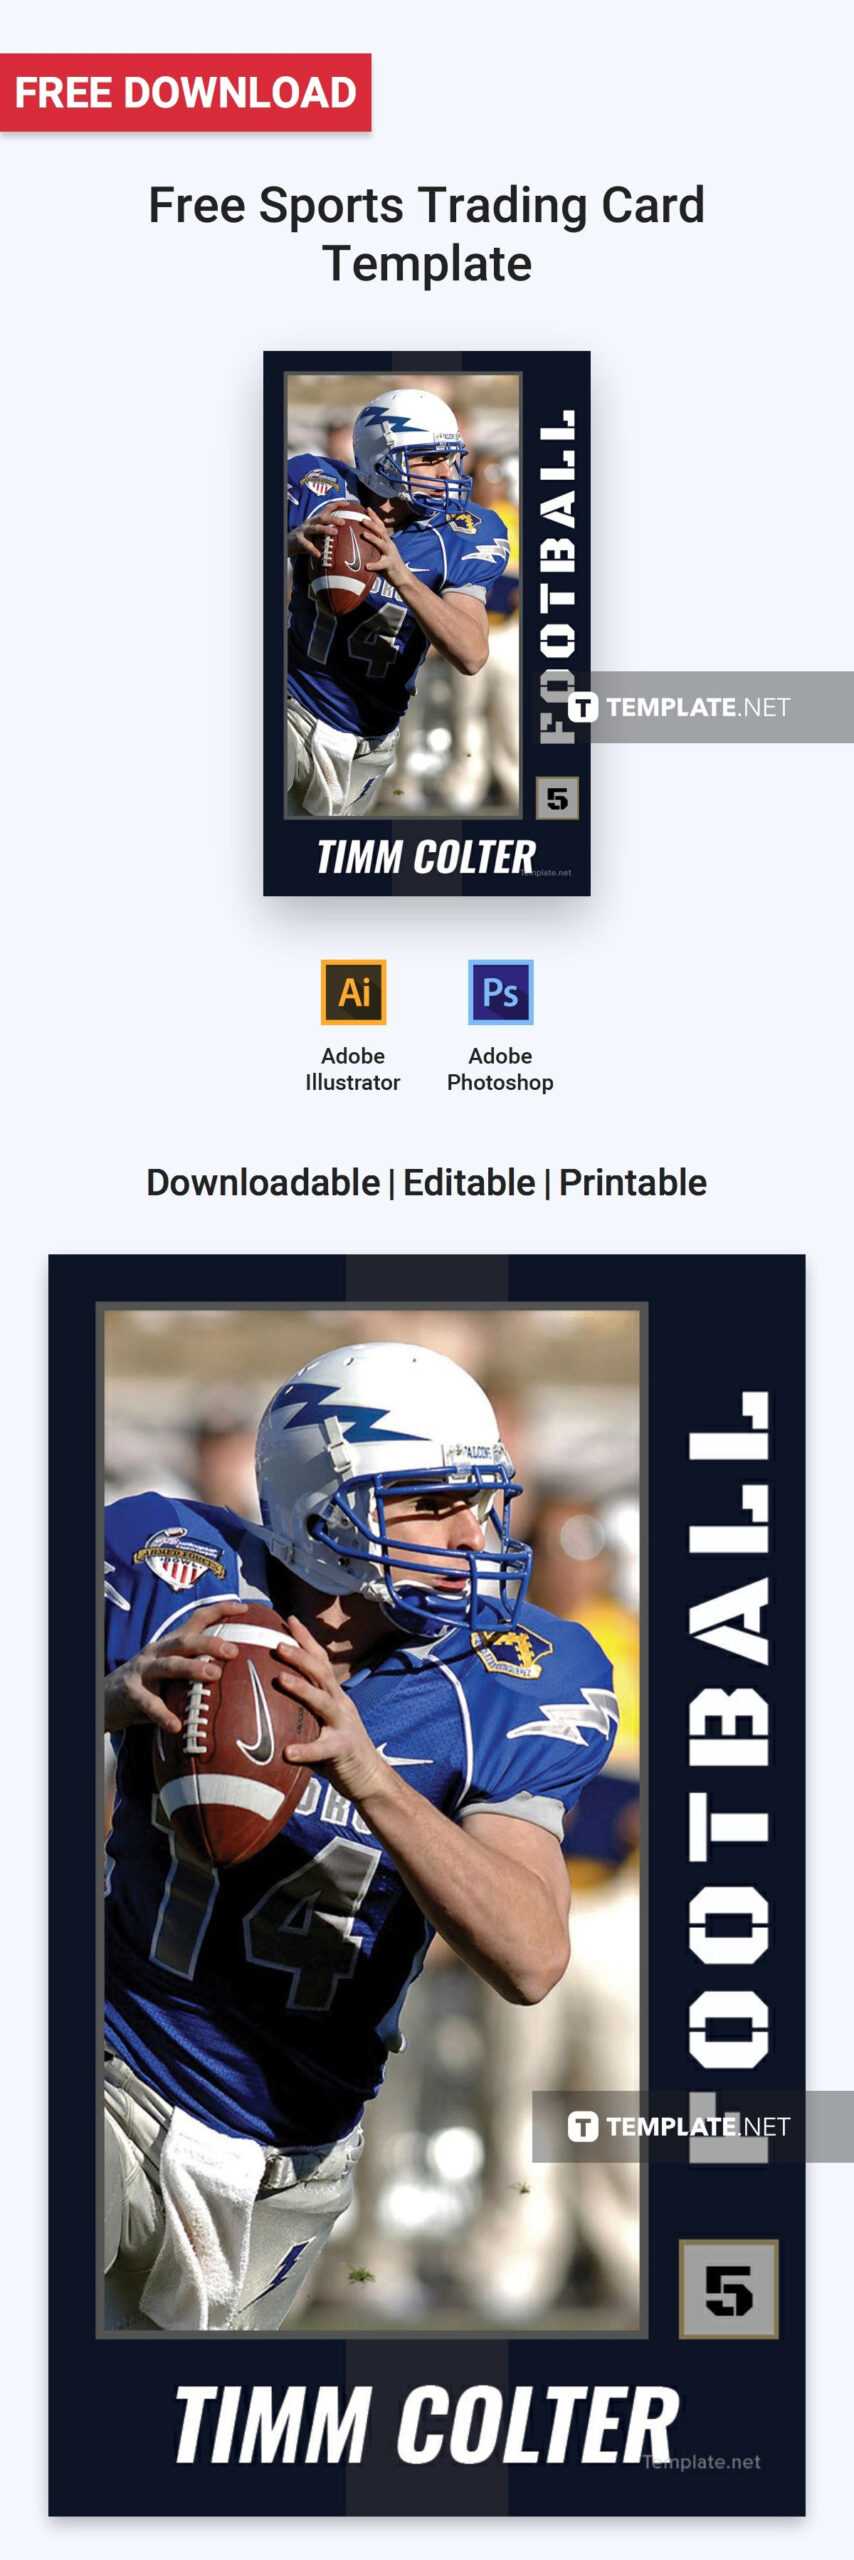 Free Sports Trading Card | Card Templates & Designs 2019 In Intended For Free Sports Card Template